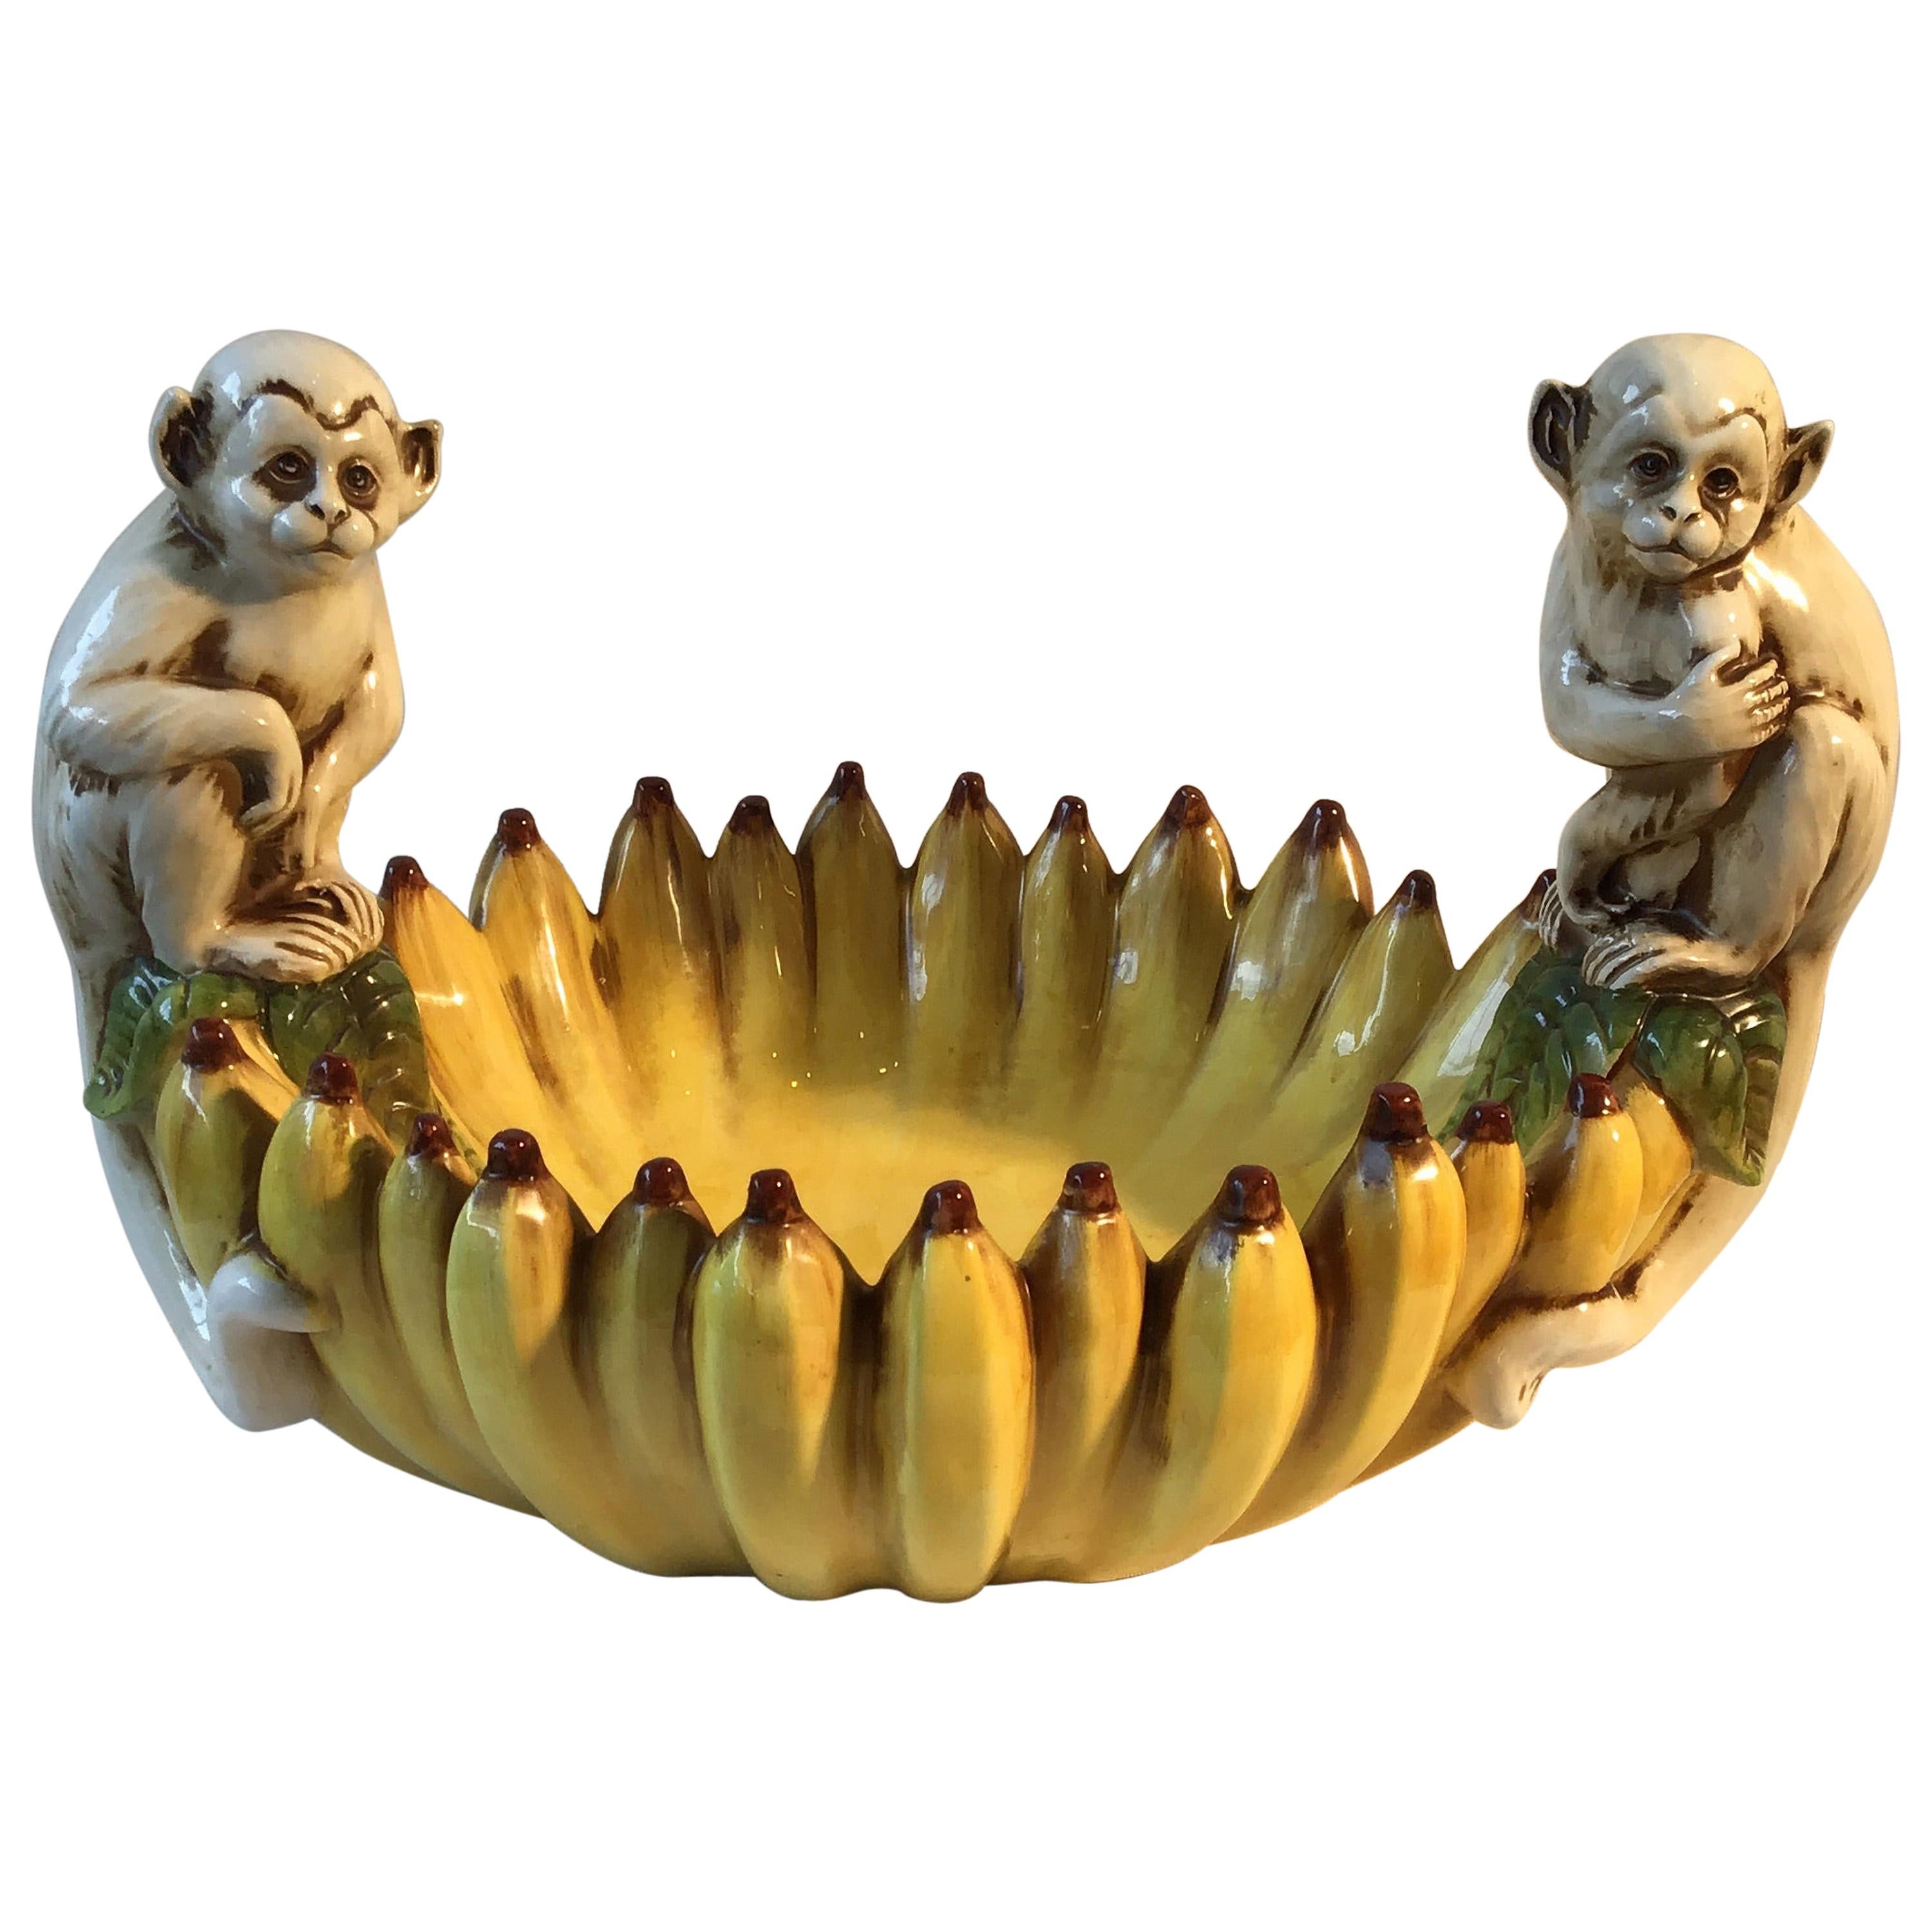 1970s Hand Painted Italian Ceramic Monkey Bowl Made for Gumps